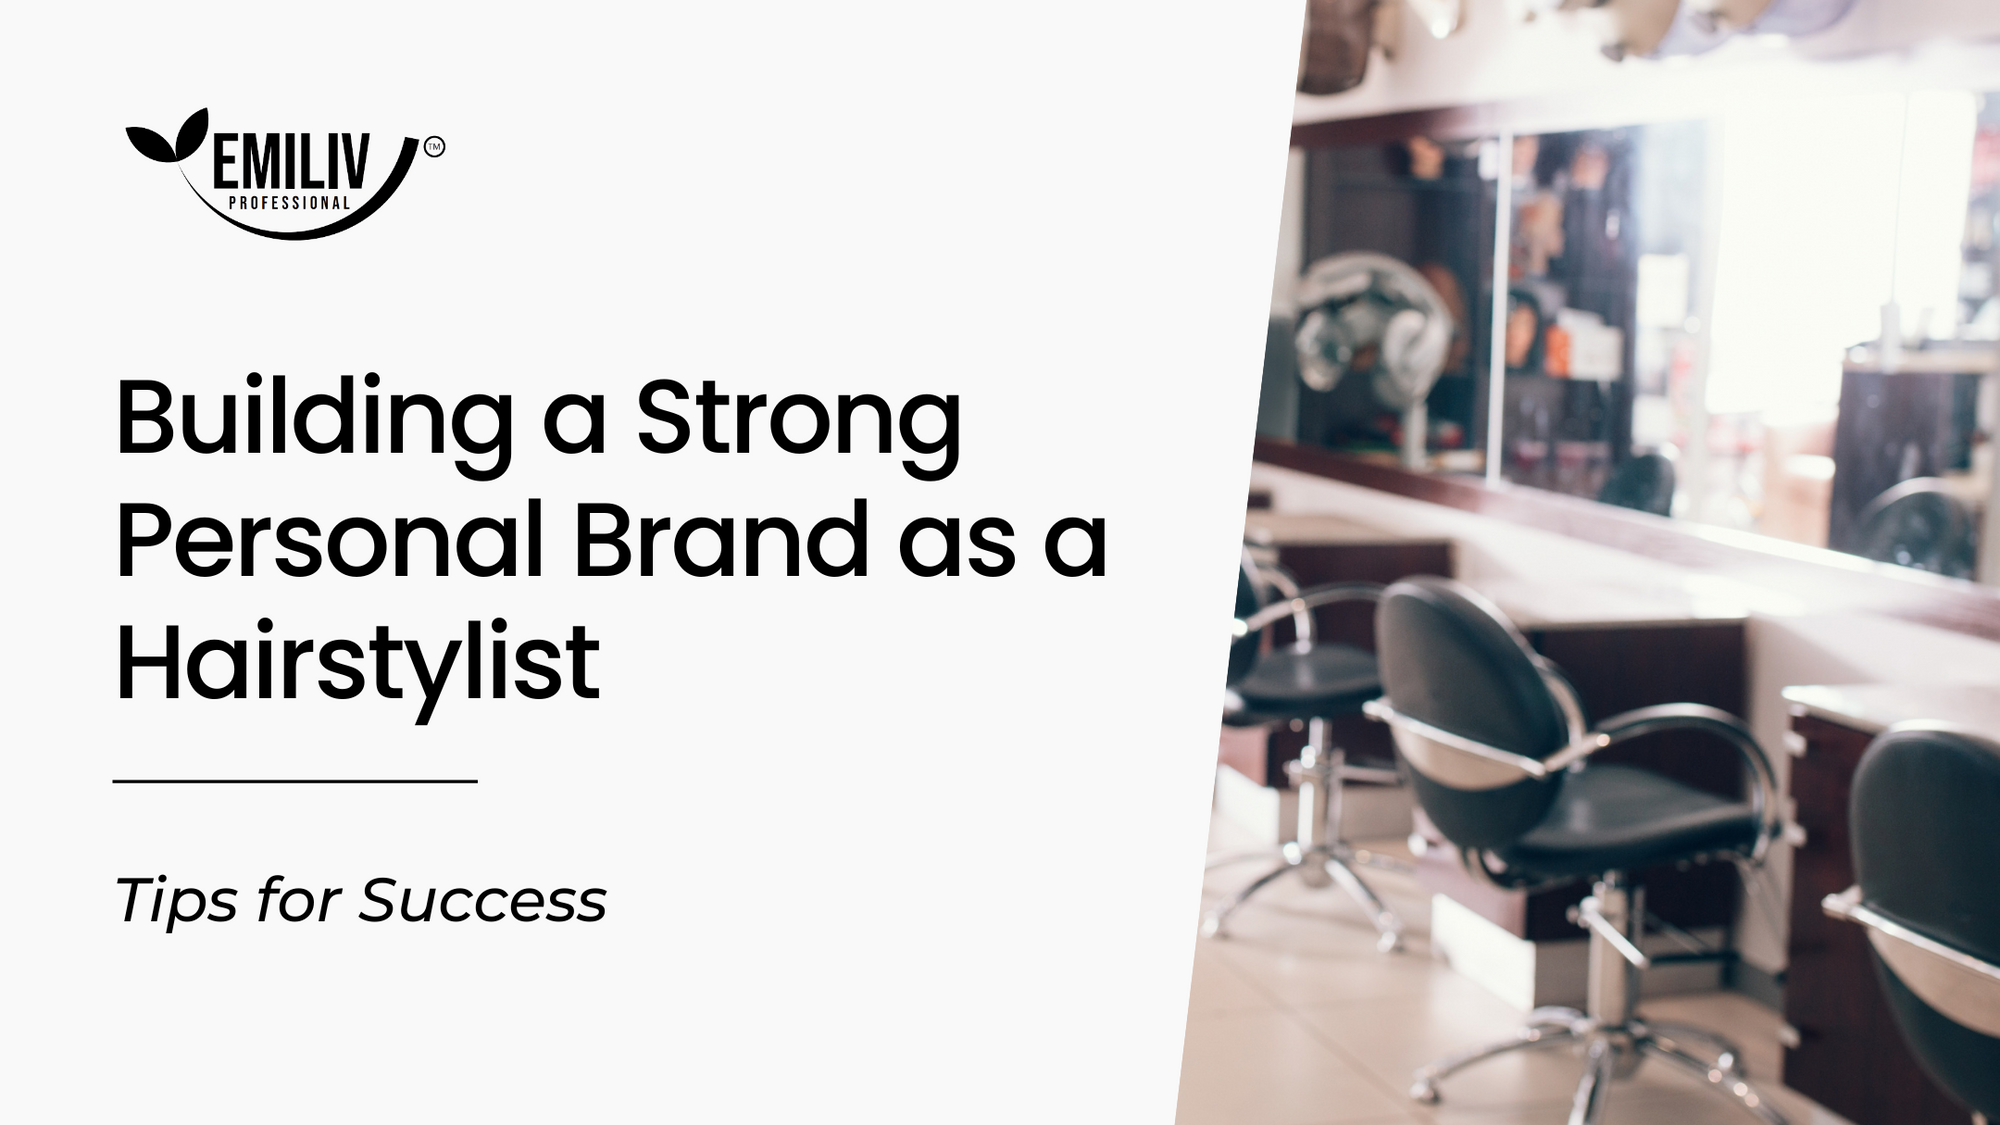 Building a Strong Personal Brand as a Hairstylist: Tips for Success